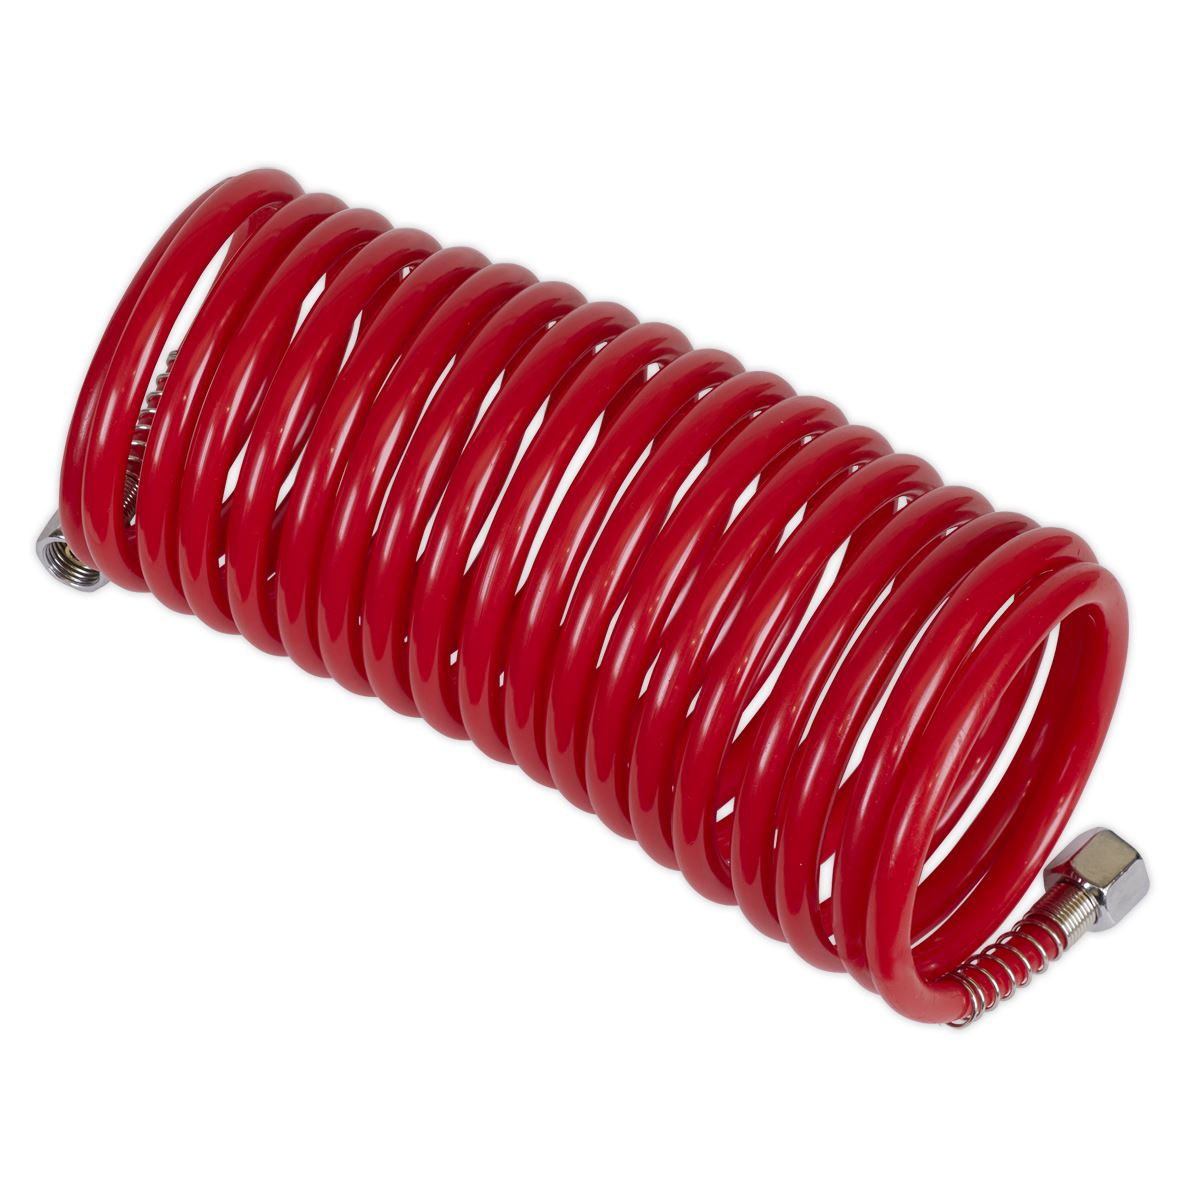 Sealey PE Coiled Air Hose 5m x 5mm Bore 1/4" BSP Unions Couplings